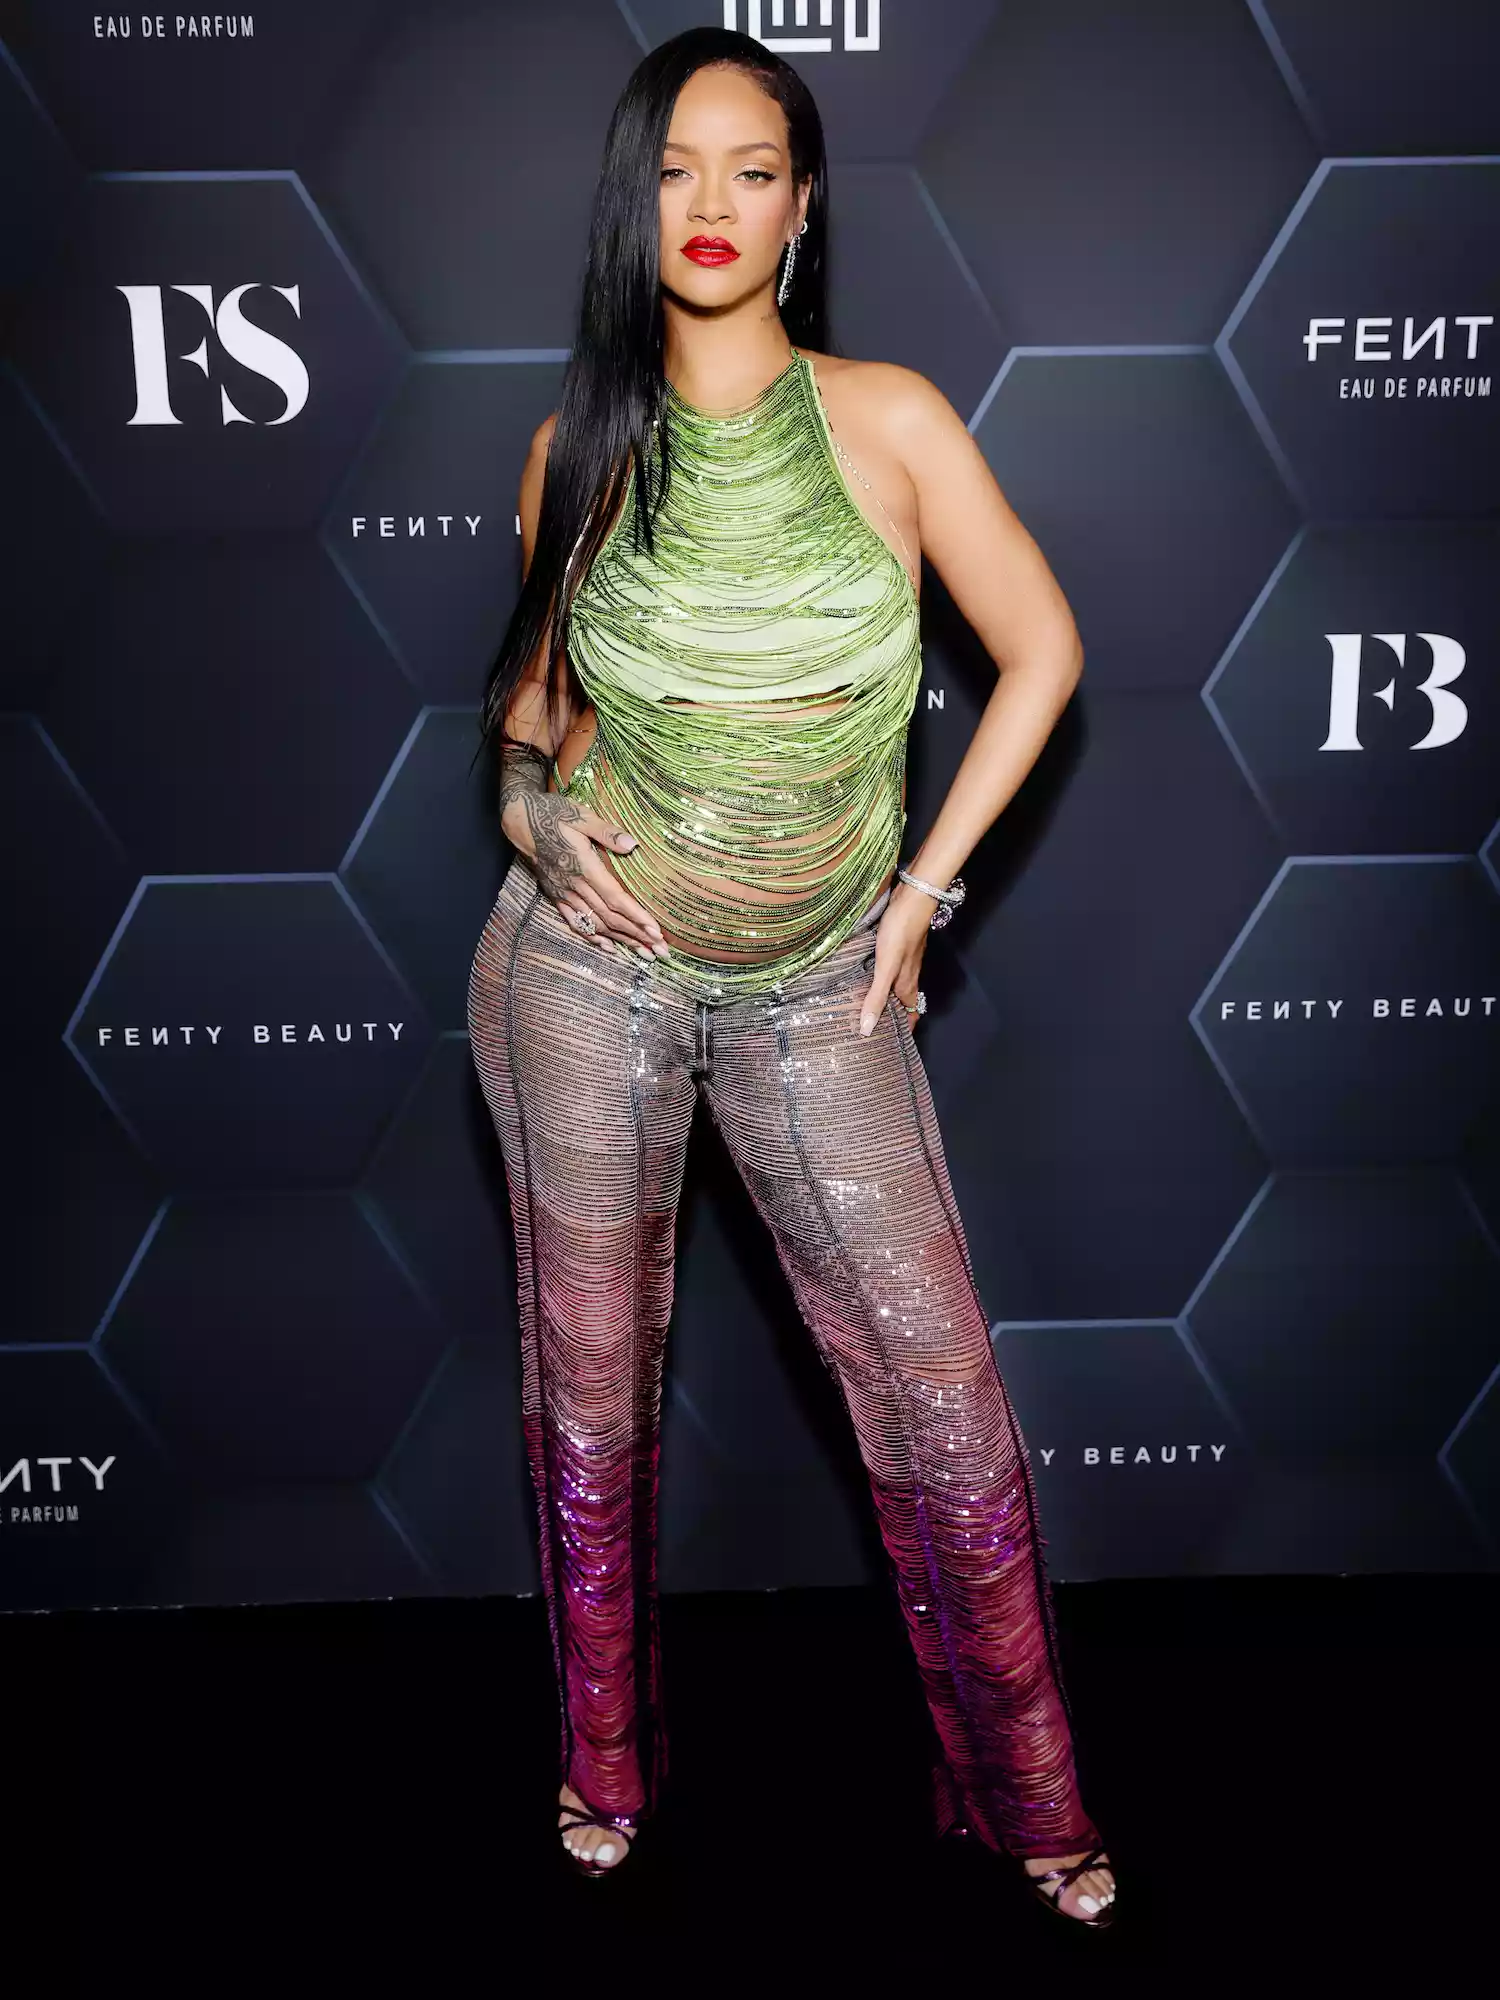 Rihanna wears a sparkly green shredded top and purple ombre pants to a Fenty Beauty event